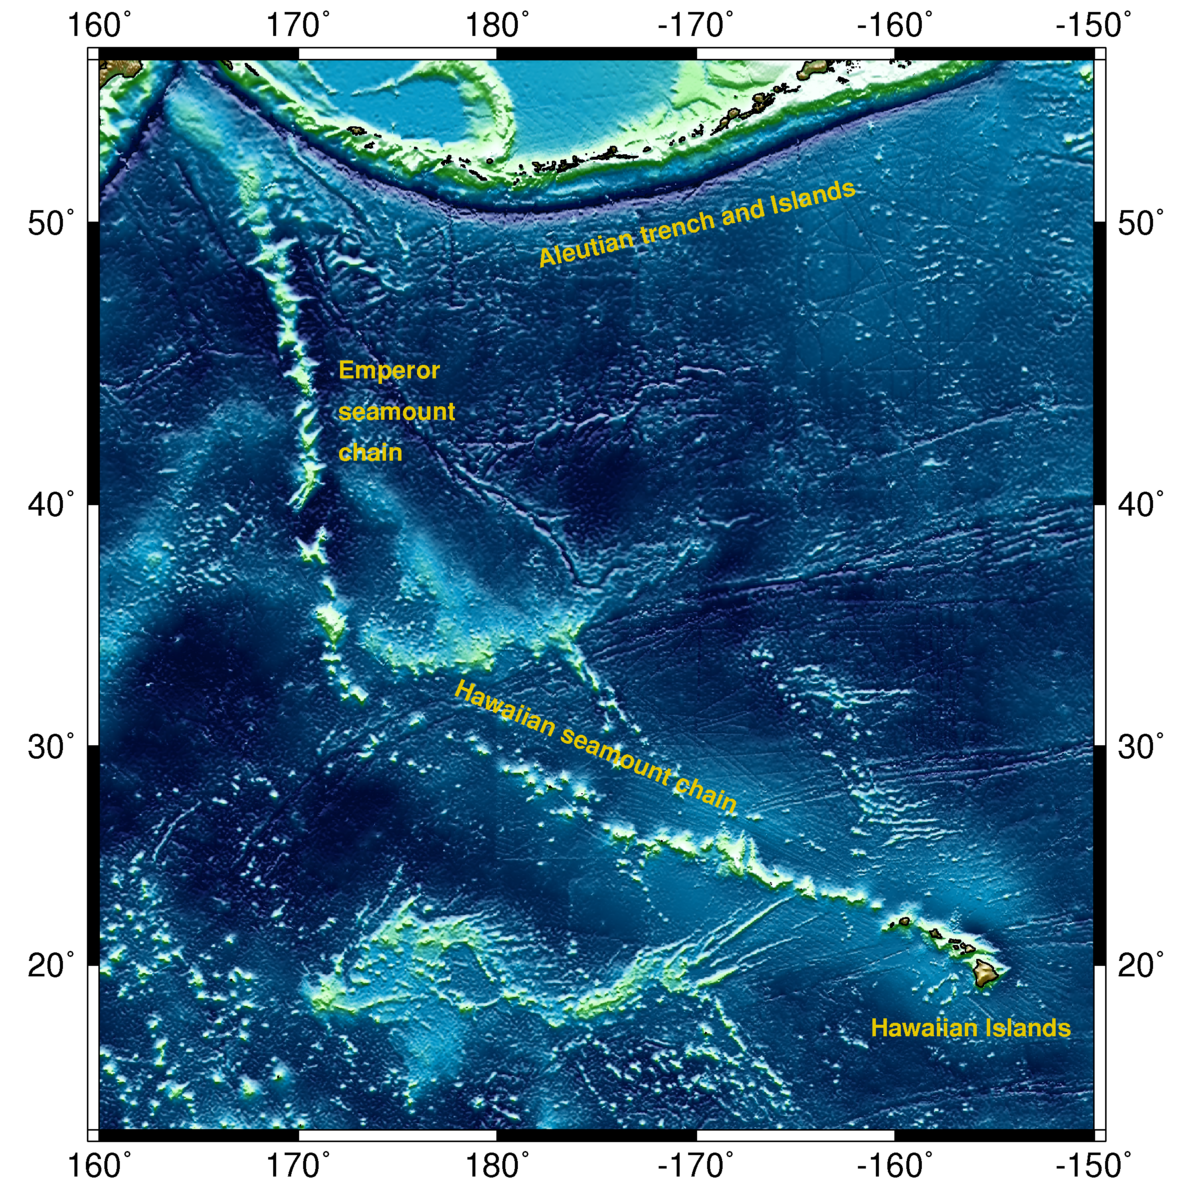 There are a series of island and seamounts in the Pacific Ocean, with a bend in the middle.